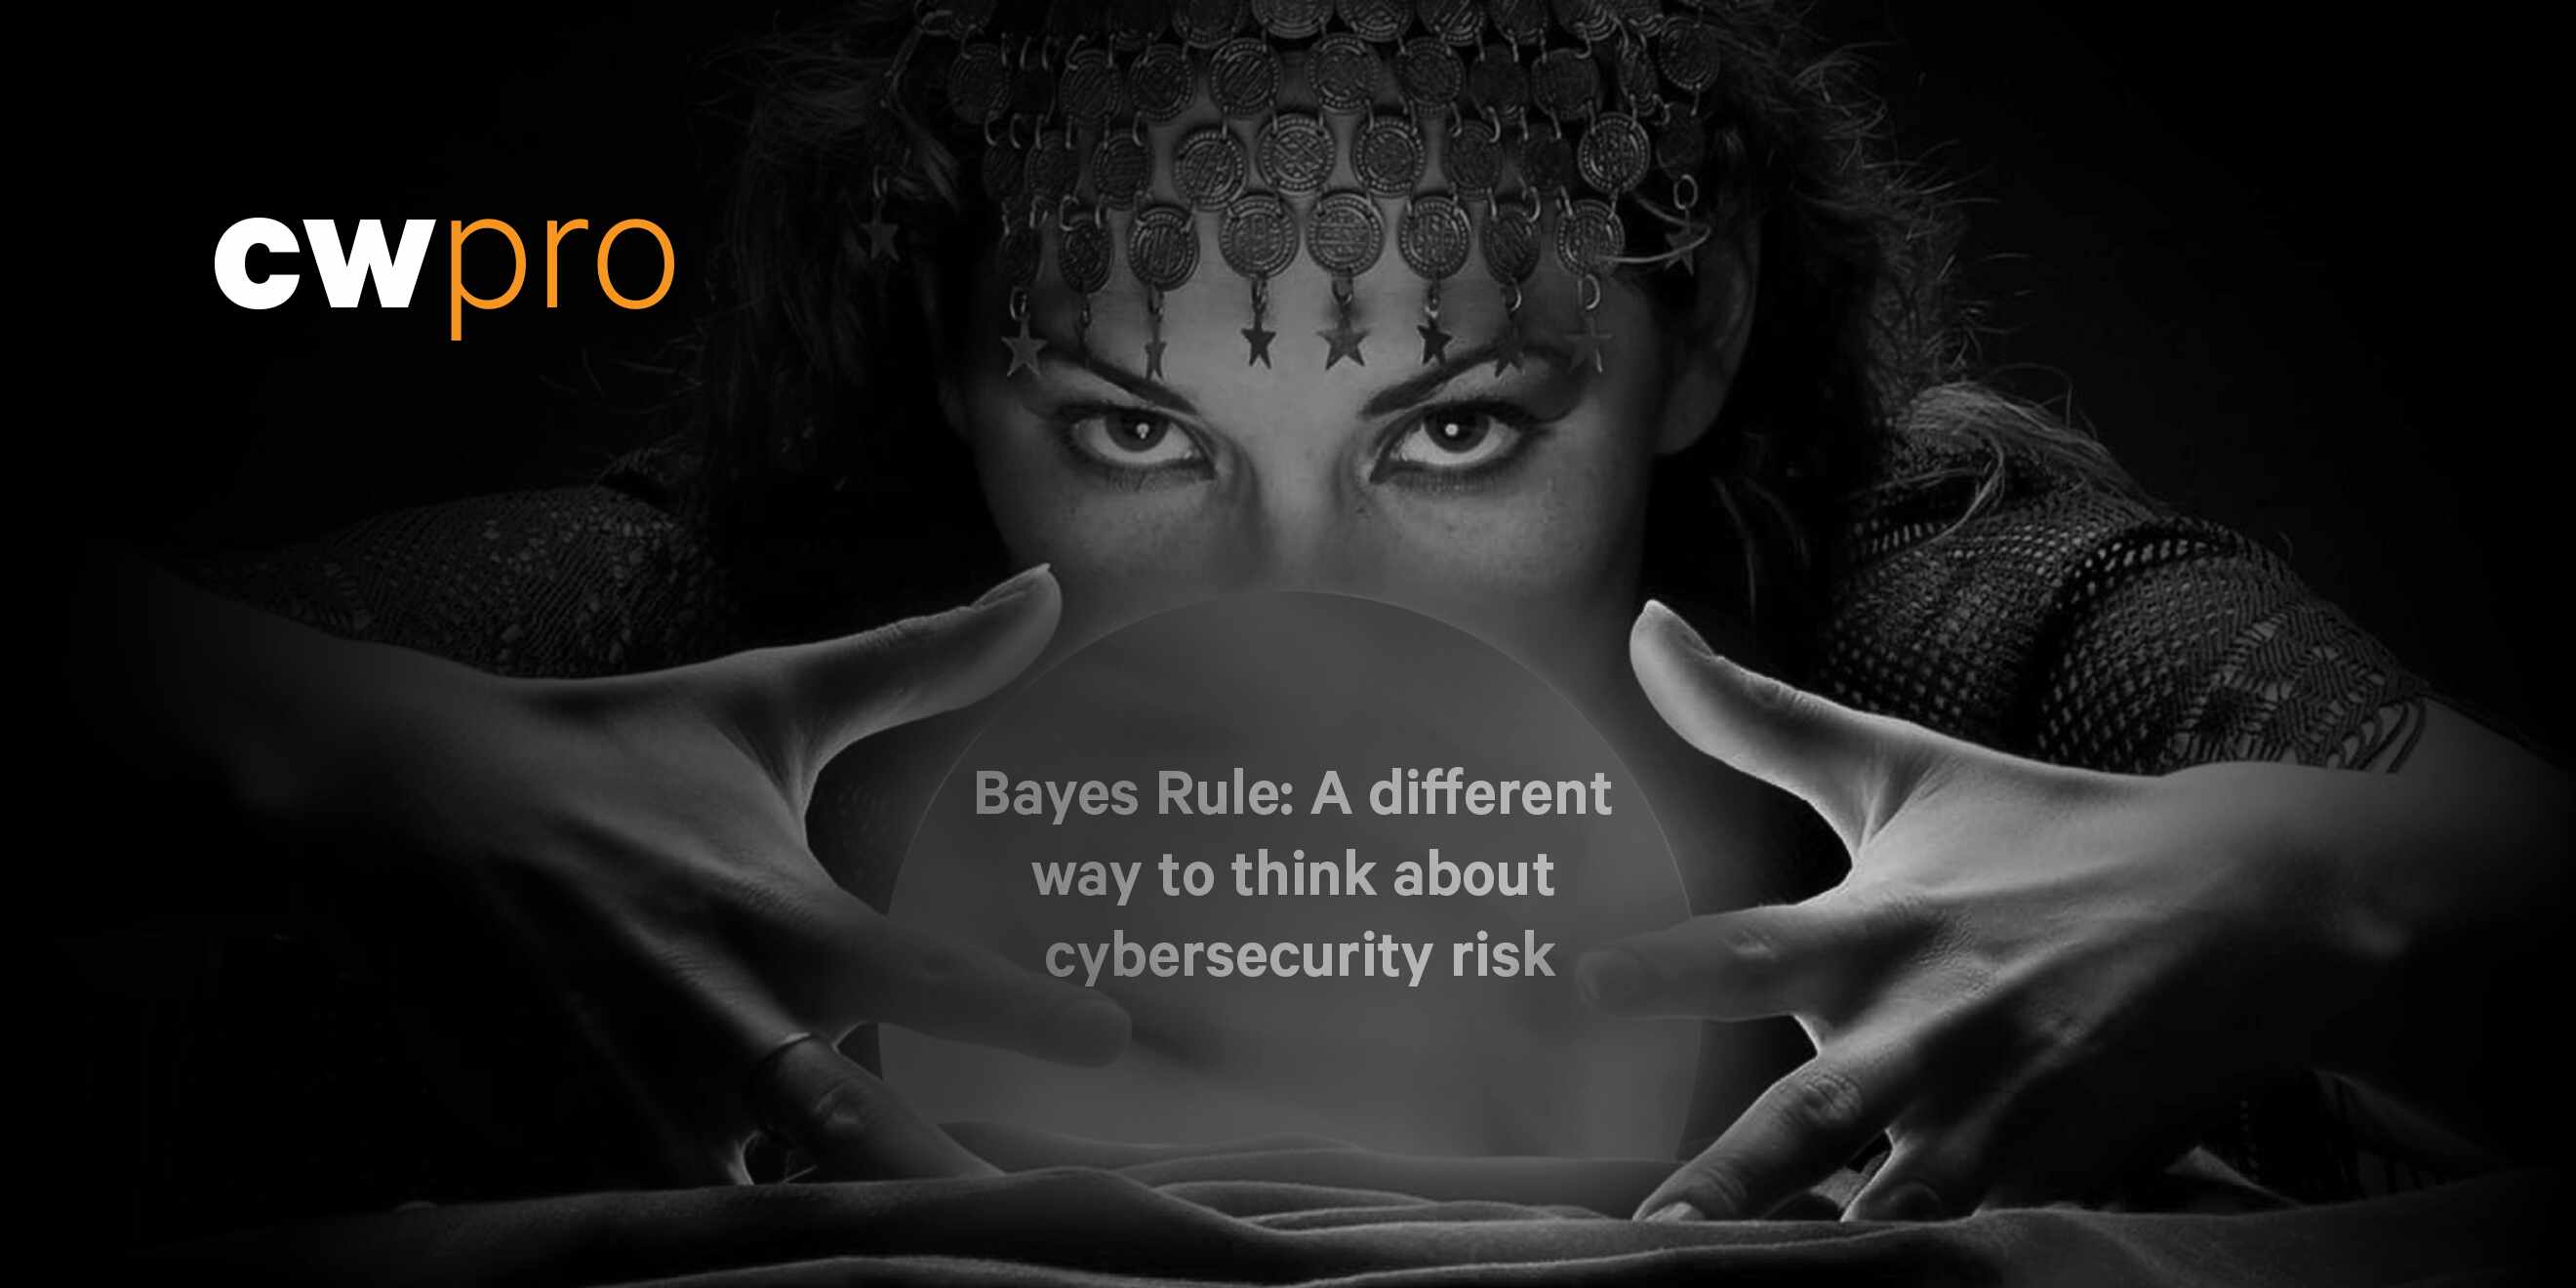 Bayes Rule: A different way to think about cybersecurity risk.